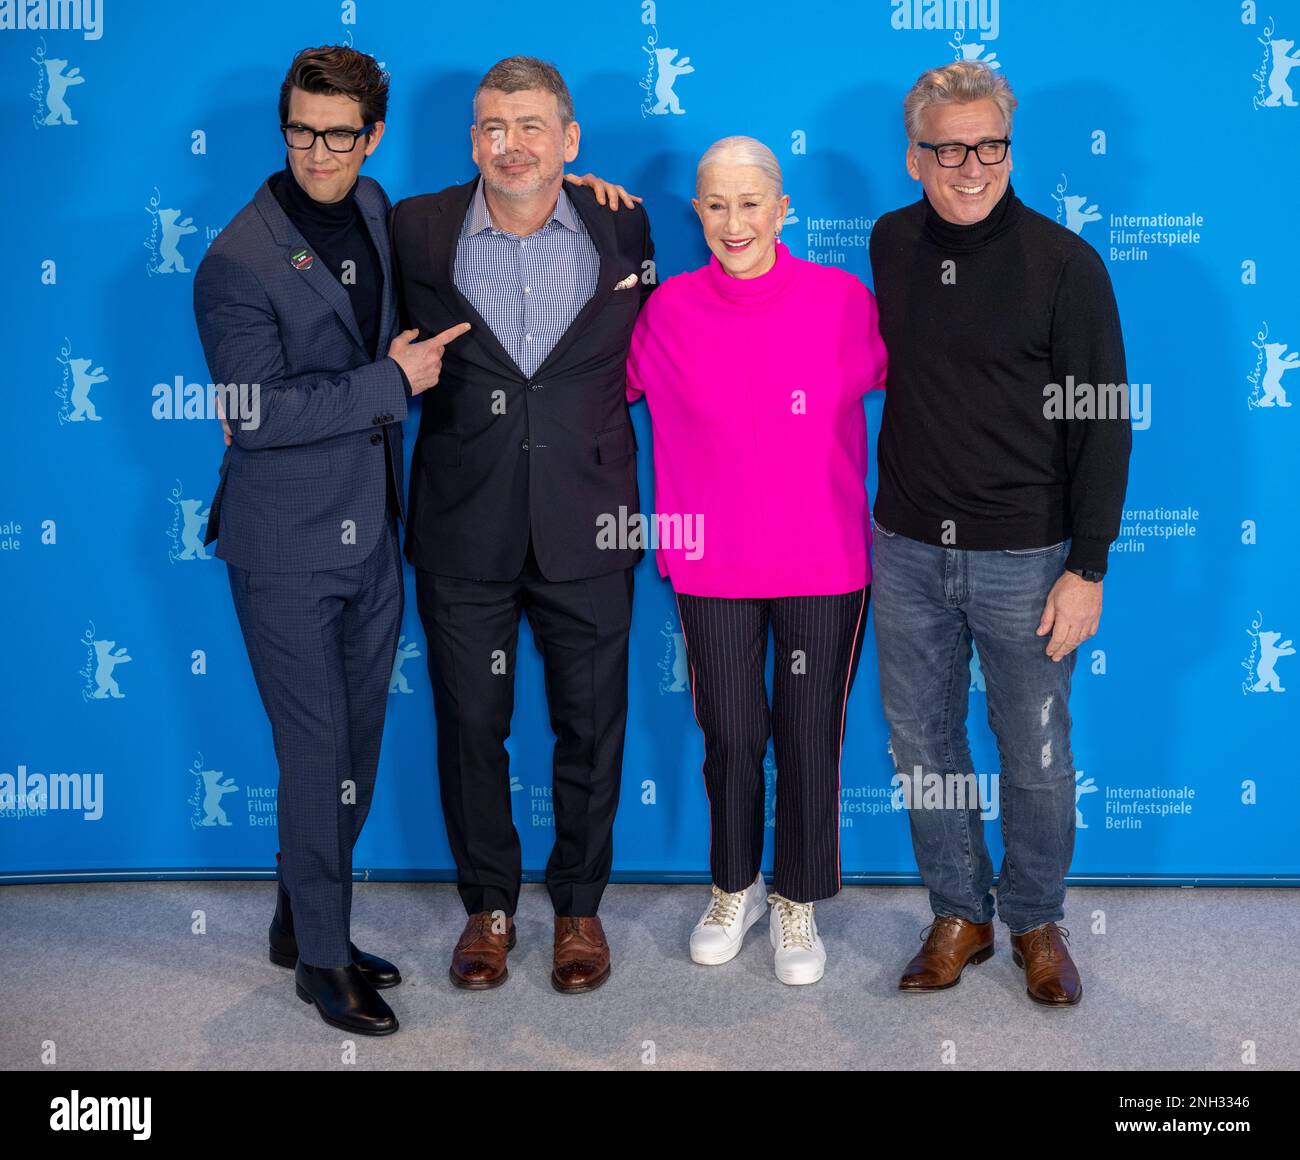 https://c8.alamy.com/comp/2NH3346/berlin-germany-20th-feb-2023-director-guy-nattiv-from-israel-l-r-nicholas-martin-screenwriter-british-actress-dame-helen-mirren-and-israeli-actor-lior-ashkenazi-stand-next-to-each-other-at-the-photocall-of-the-film-golda-at-the-grand-hyatt-the-film-is-screening-in-the-berlinale-special-gala-section-the-73rd-international-film-festival-will-take-place-in-berlin-from-feb-16-26-2023-credit-monika-skolimowskadpaalamy-live-news-2NH3346.jpg